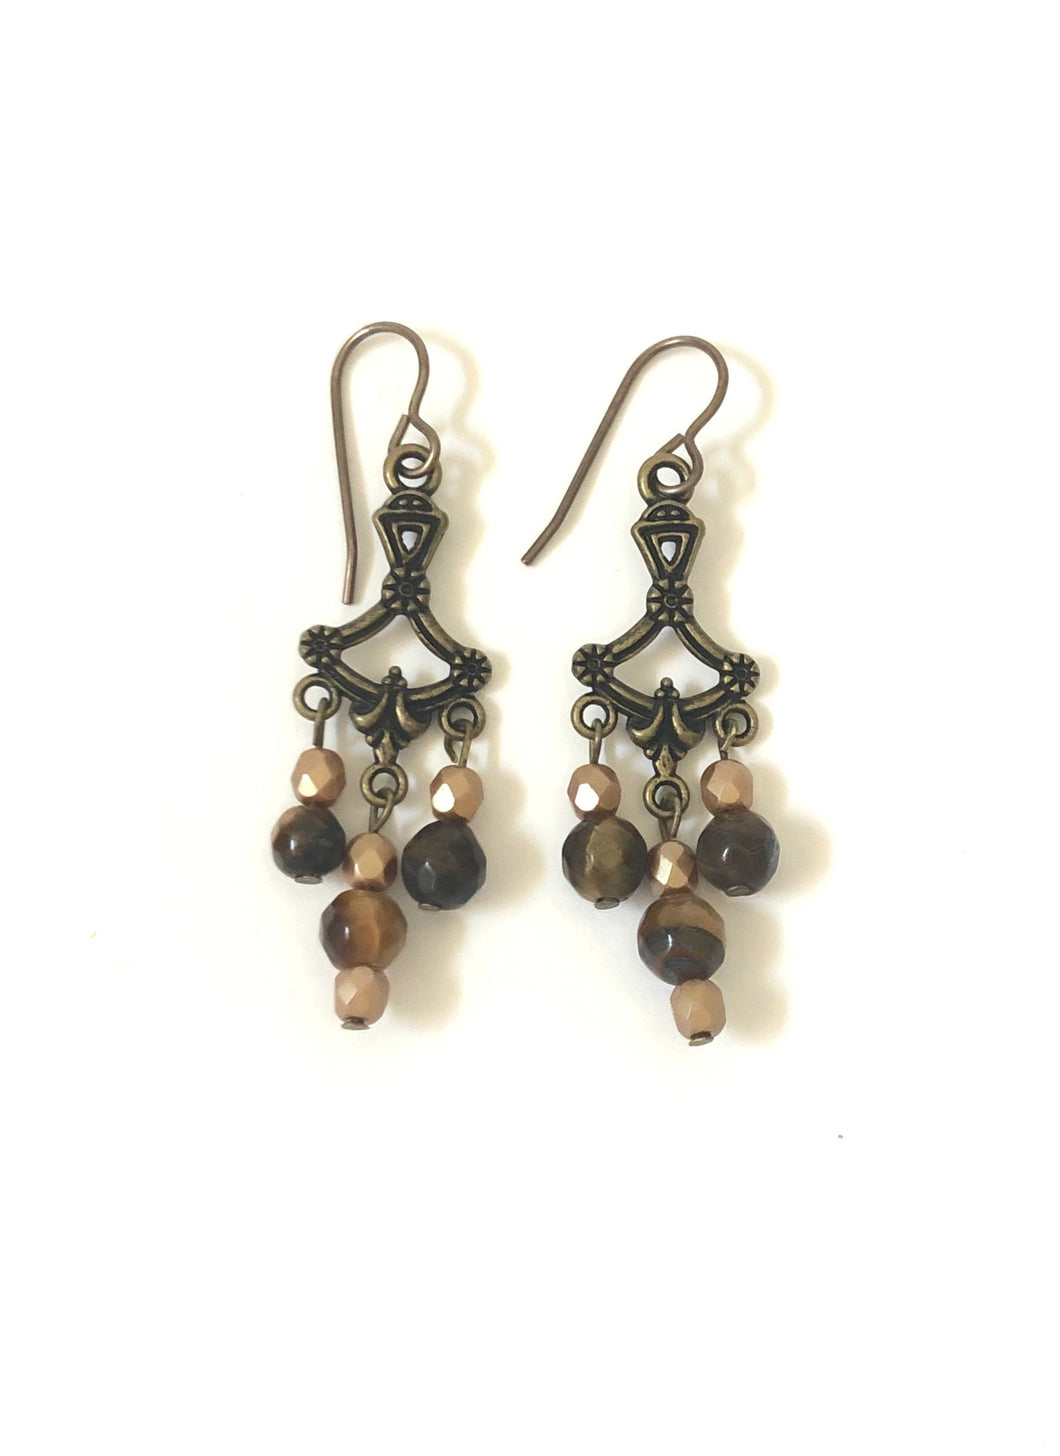 Vintage Chandelier Earrings Antique Brass And Tiger Eye Beads